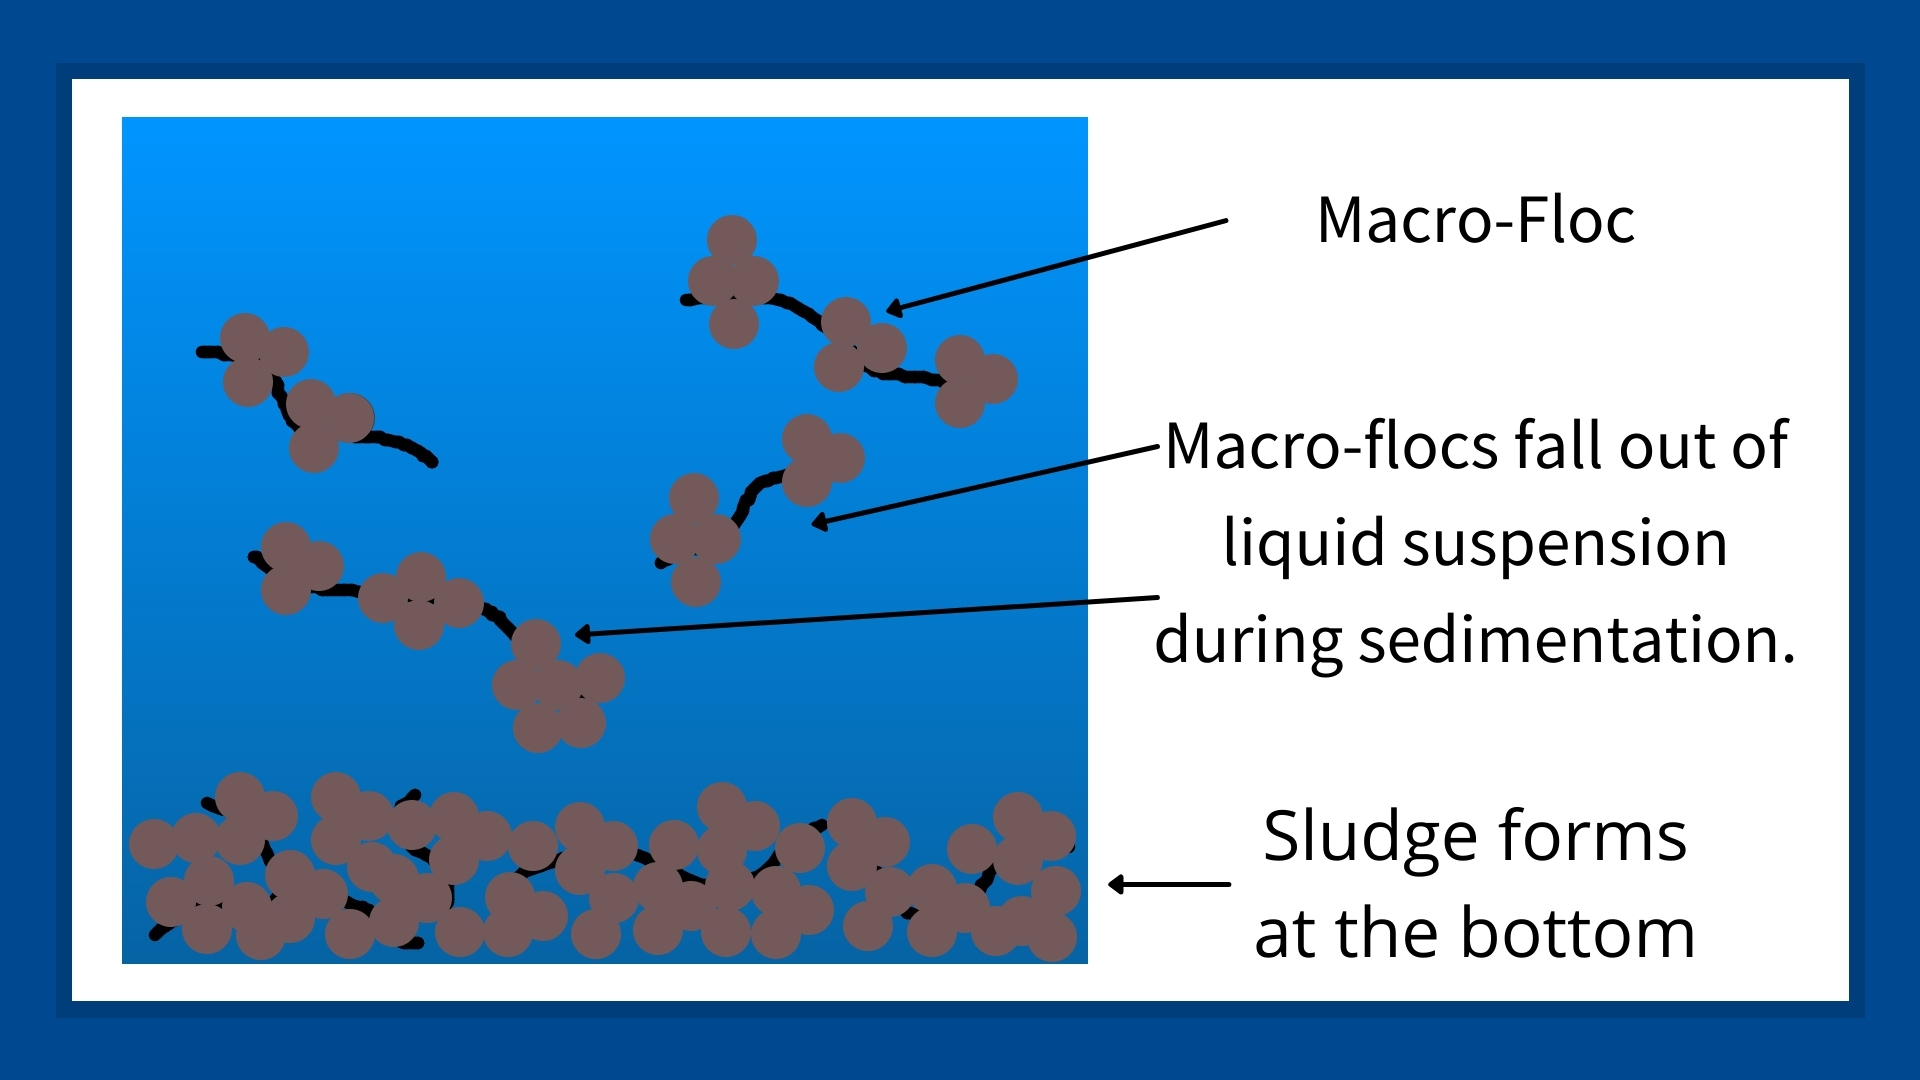 This image contains a graphic to the left and text on the right. The graphic and text are showing how flocculants capture small particles and bring them together for form large particles that increase sedimentation.